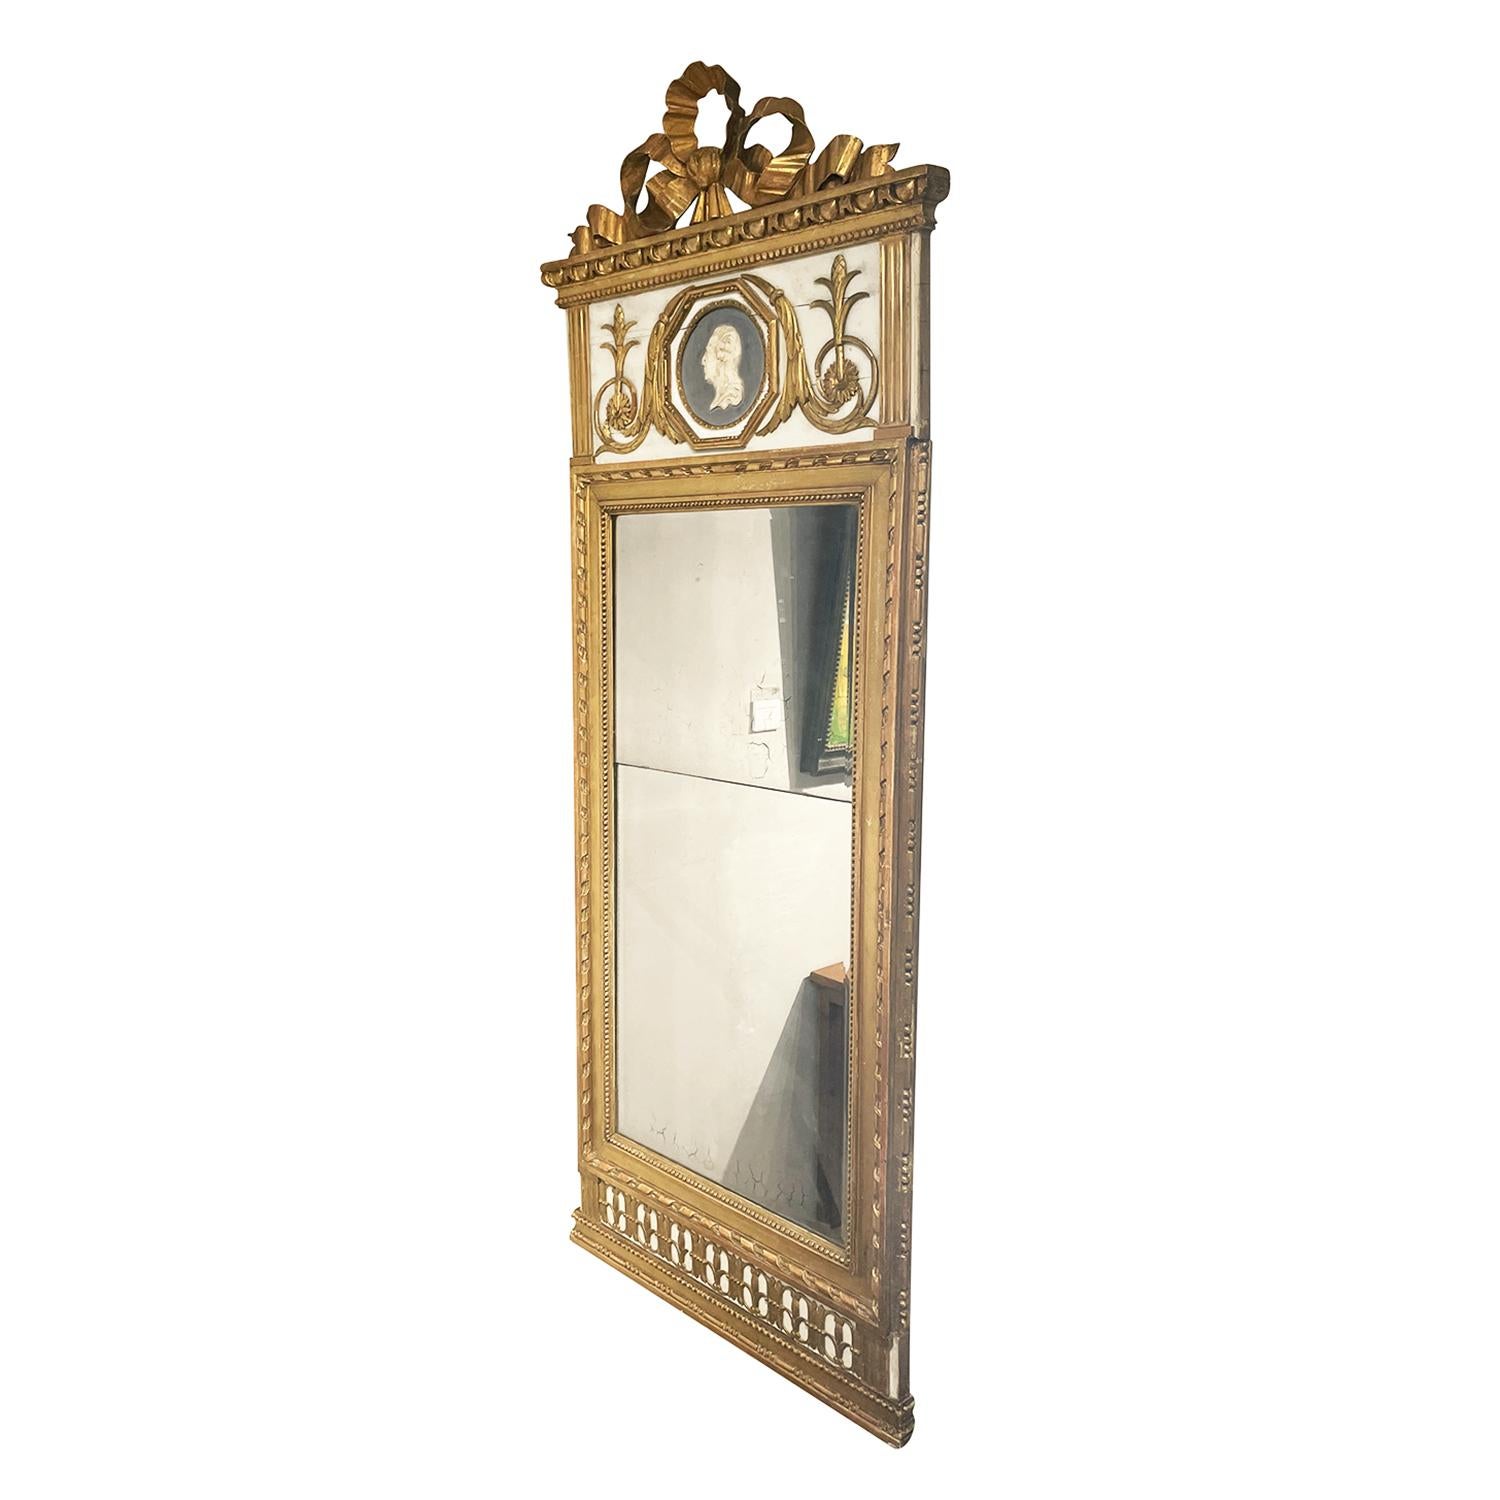 A gold, antique Swedish Gustavian wall mirror made of hand crafted gilded Pinewood with its original two-part mirrored glass, in good condition. The particularized carved Scandinavian wall décor piece is enhanced by detailed wood carvings and